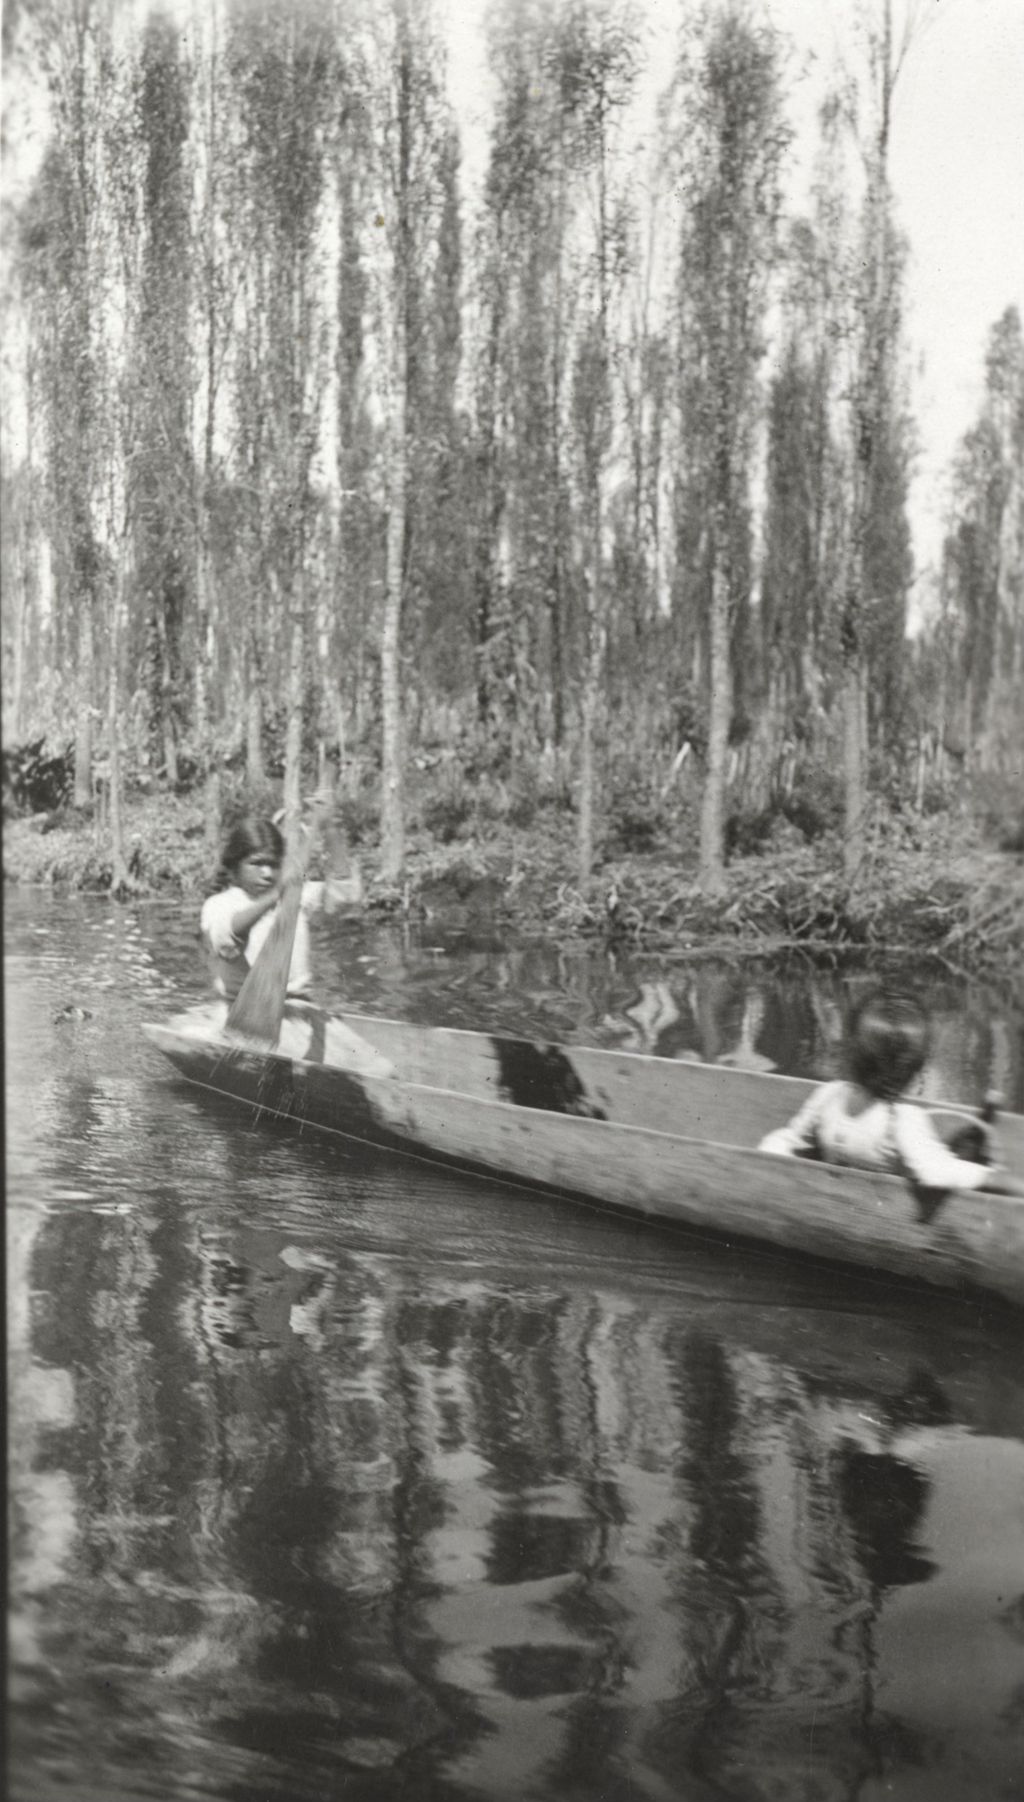 Miniature of Two people in a dugout canoe photographed on Jane Addams' trip to Mexico